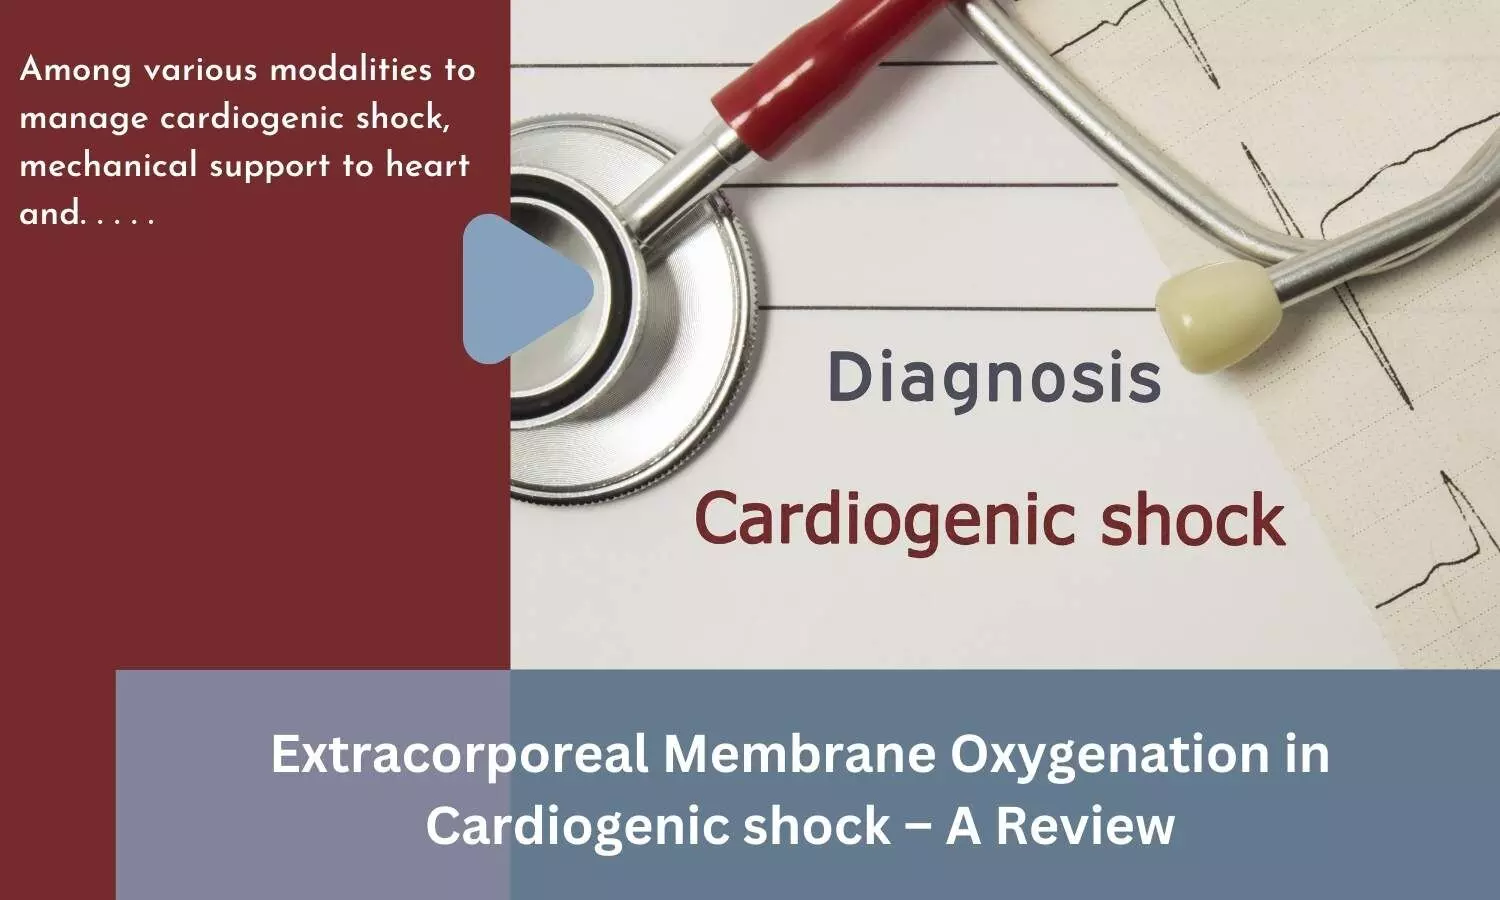 Extracorporeal Membrane Oxygenation in Cardiogenic shock-A Review